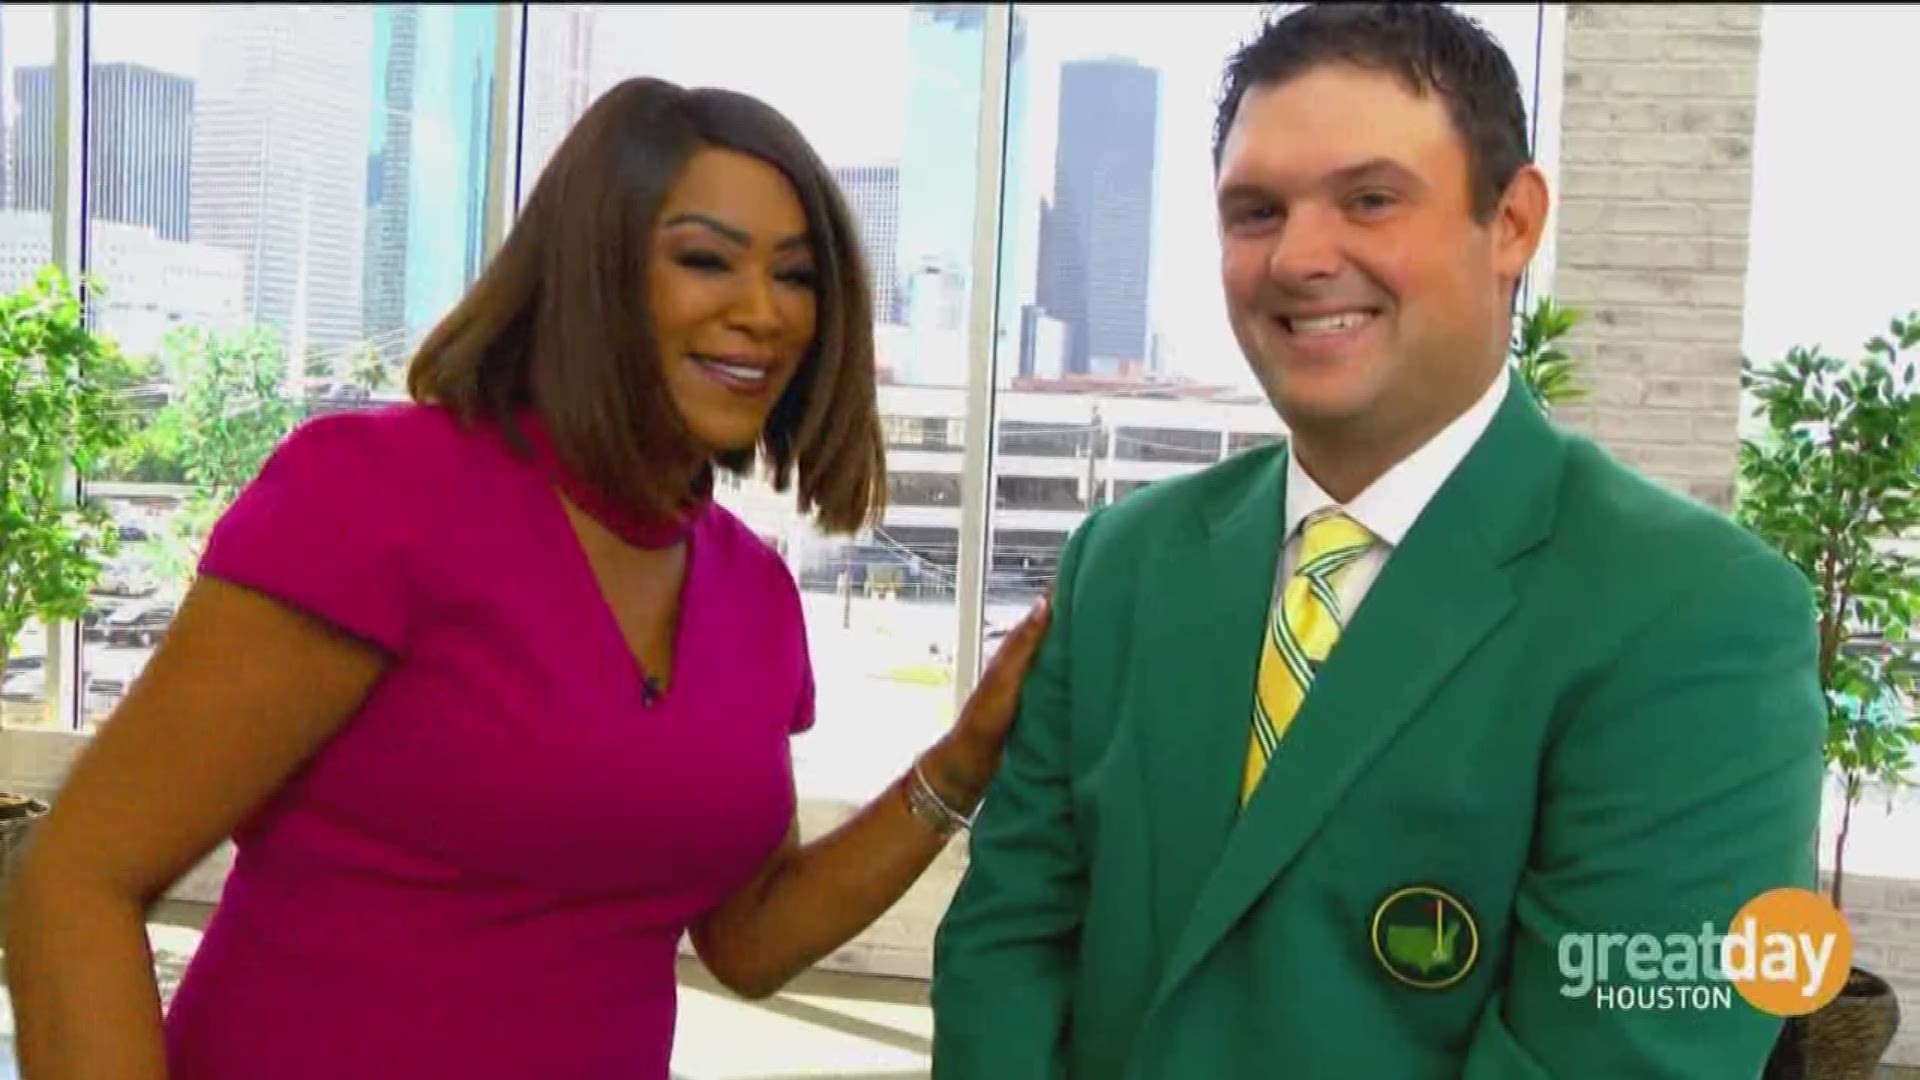 Texas native Patrick Reed speaks with Deborah Duncan about winning the Masters, why he loves golf, and more
